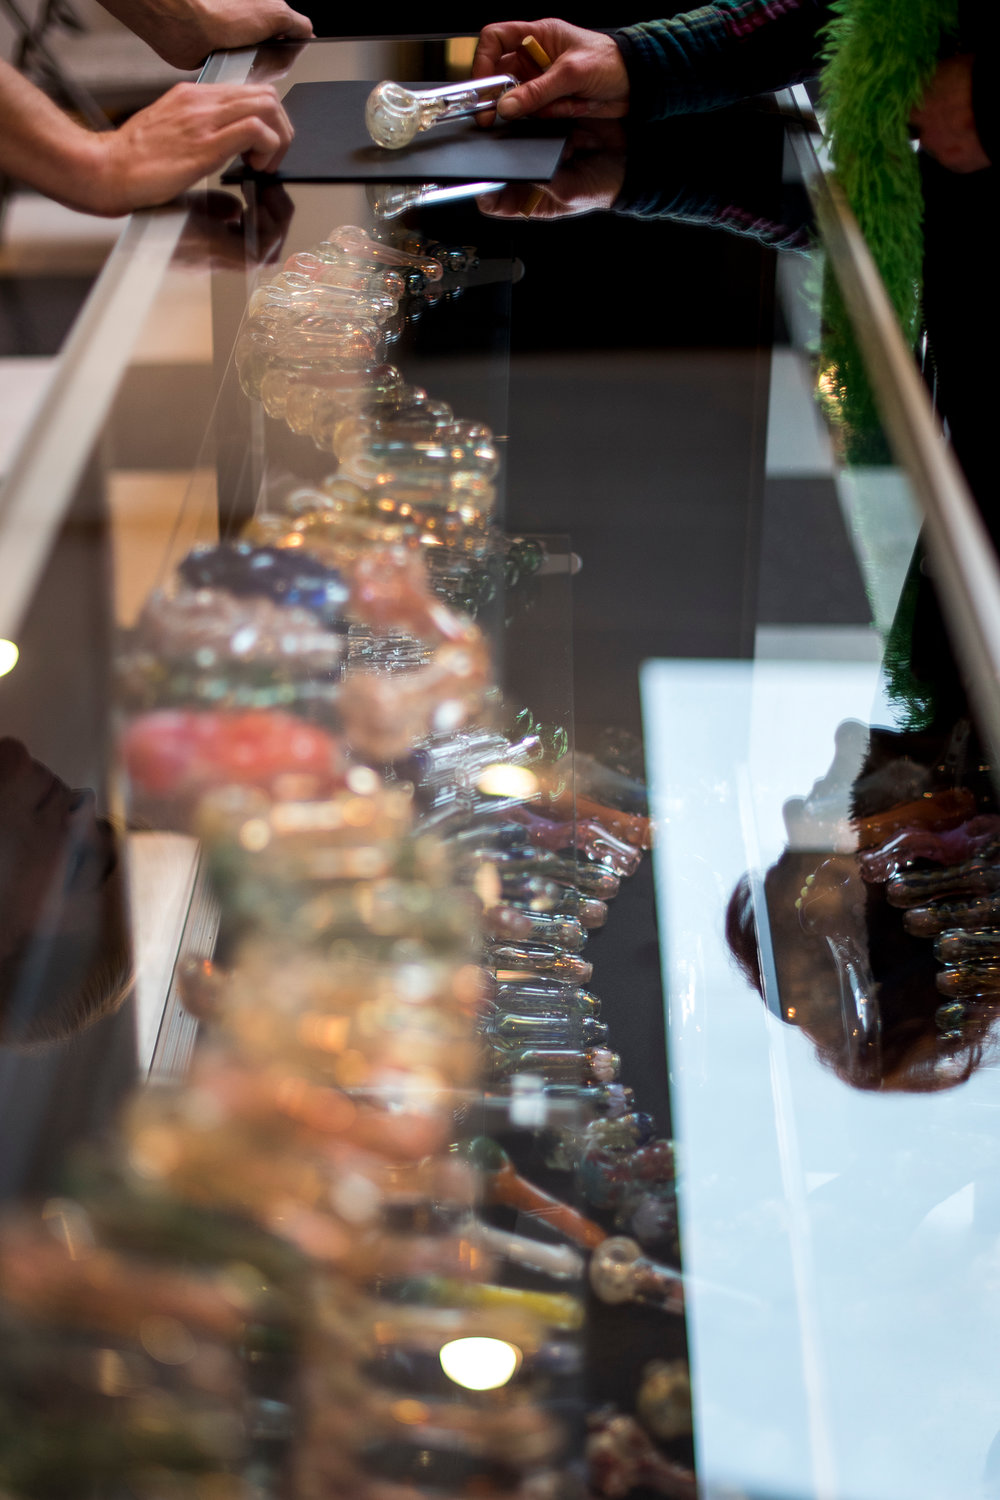 A customers looks at one of many glass pipes in a case at The Jackal in downtown Chehalis on Tuesday, Nov. 24.